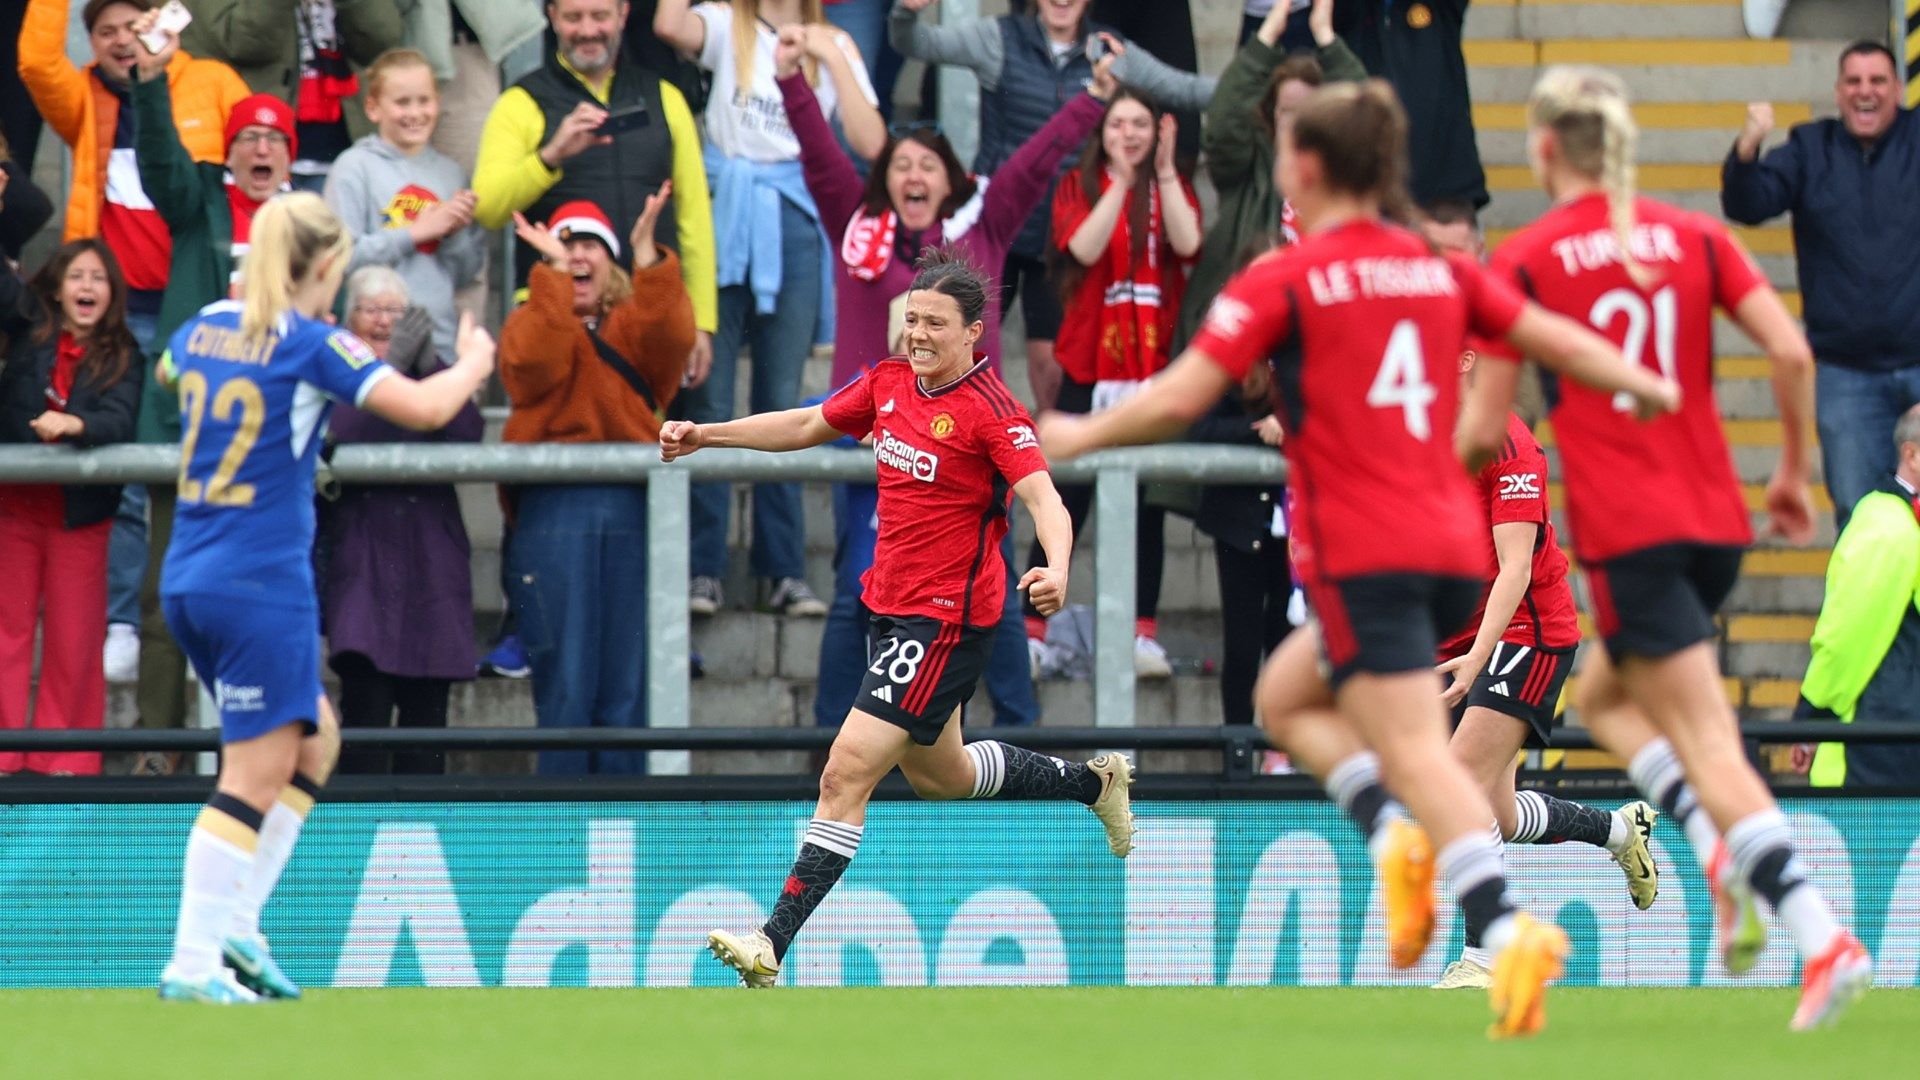 another trophy passes emma hayes by: winners and losers as mary earps and rachel williams' heroics send man utd to women's fa cup final at treble-chasing chelsea's expense